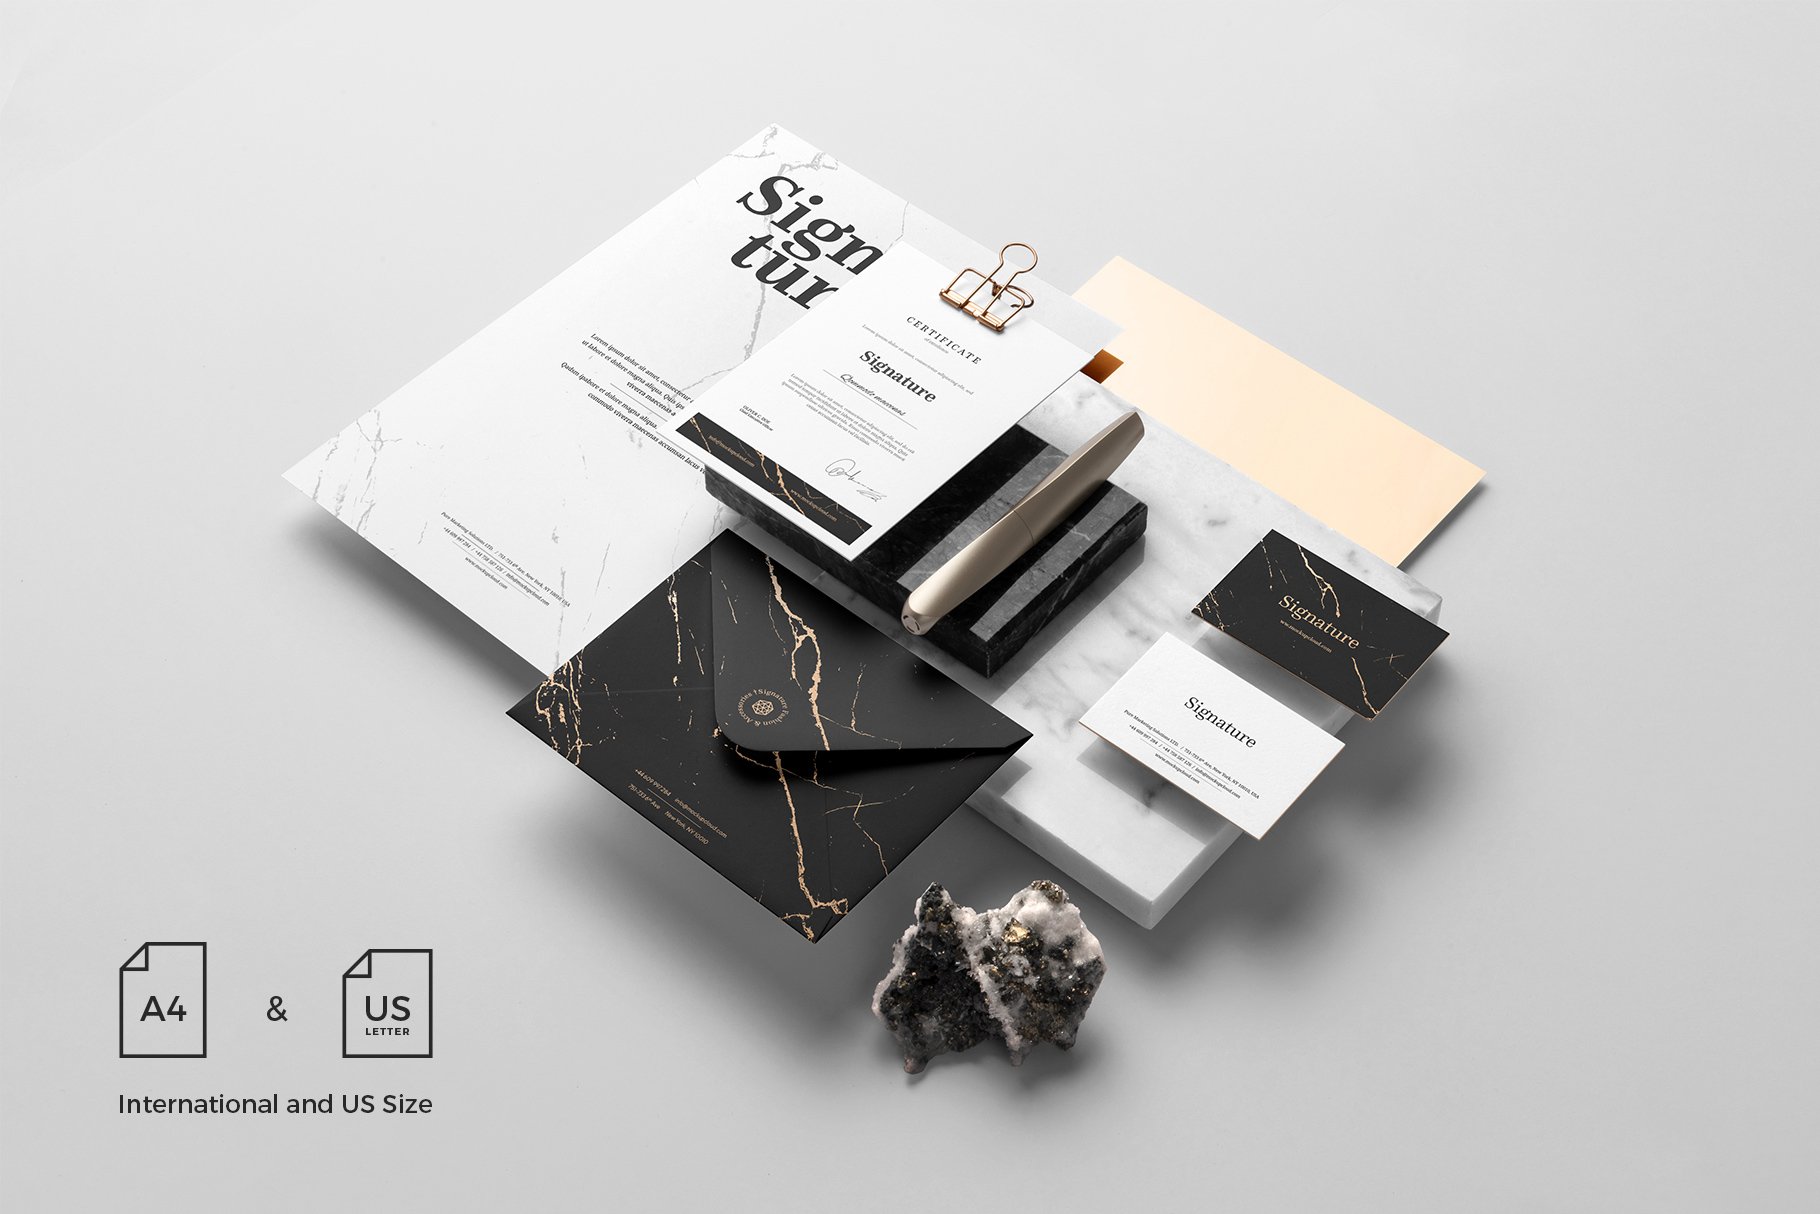 Download 10 Awesome Stationery Branding Mockup PSD Mockup Templates